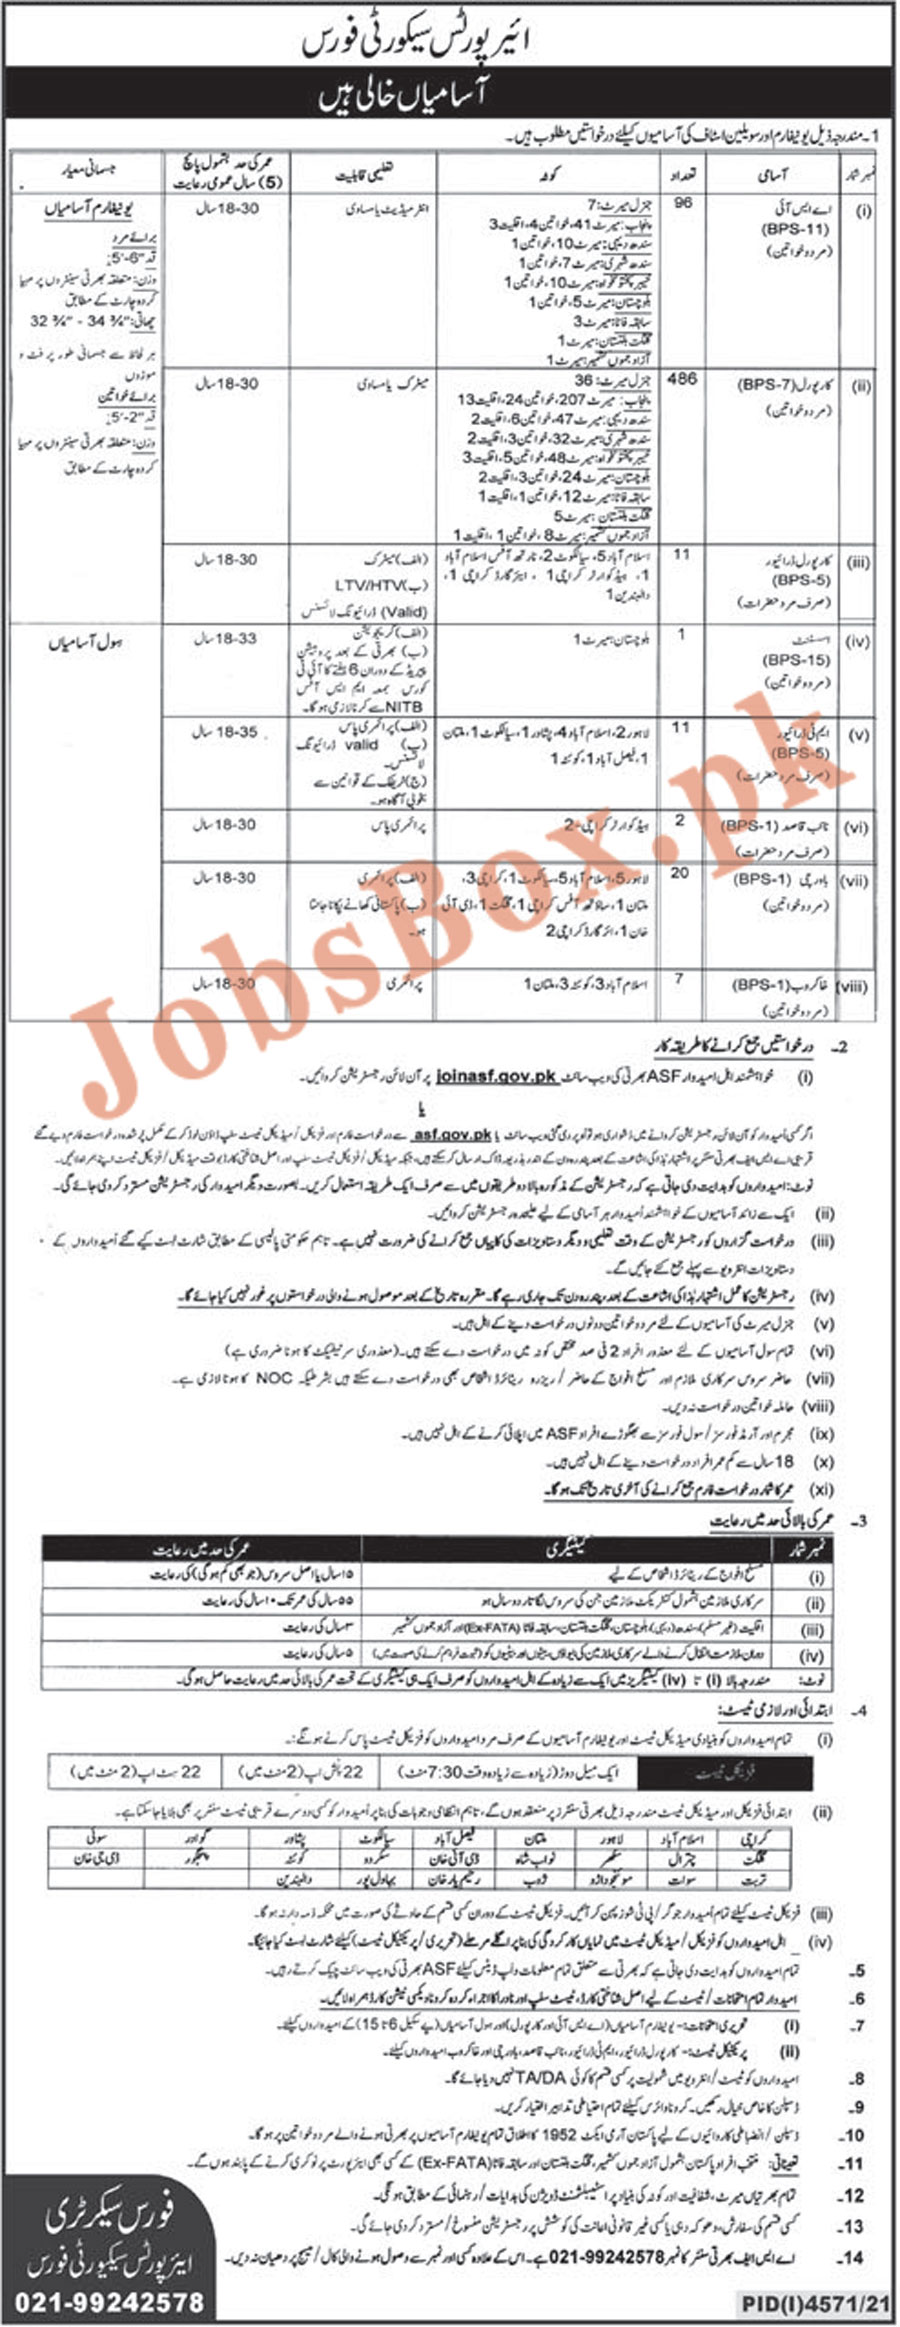 Airport Security Force ASF Jobs 2022 - Apply Online www.joinasf.gov.pk